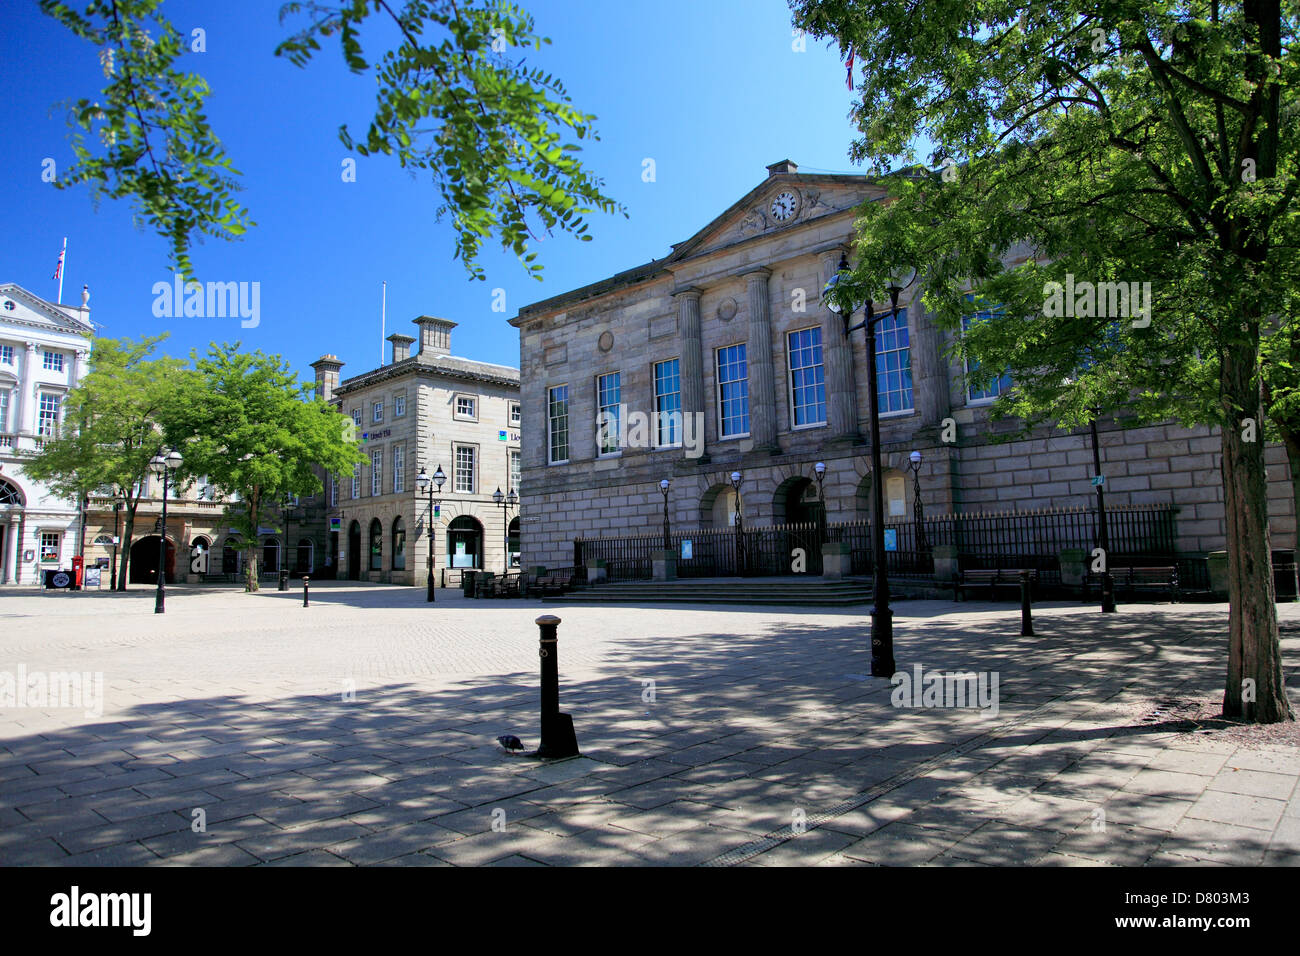 The Market Square, Stafford with the Shire Hall on the right Stock Photo